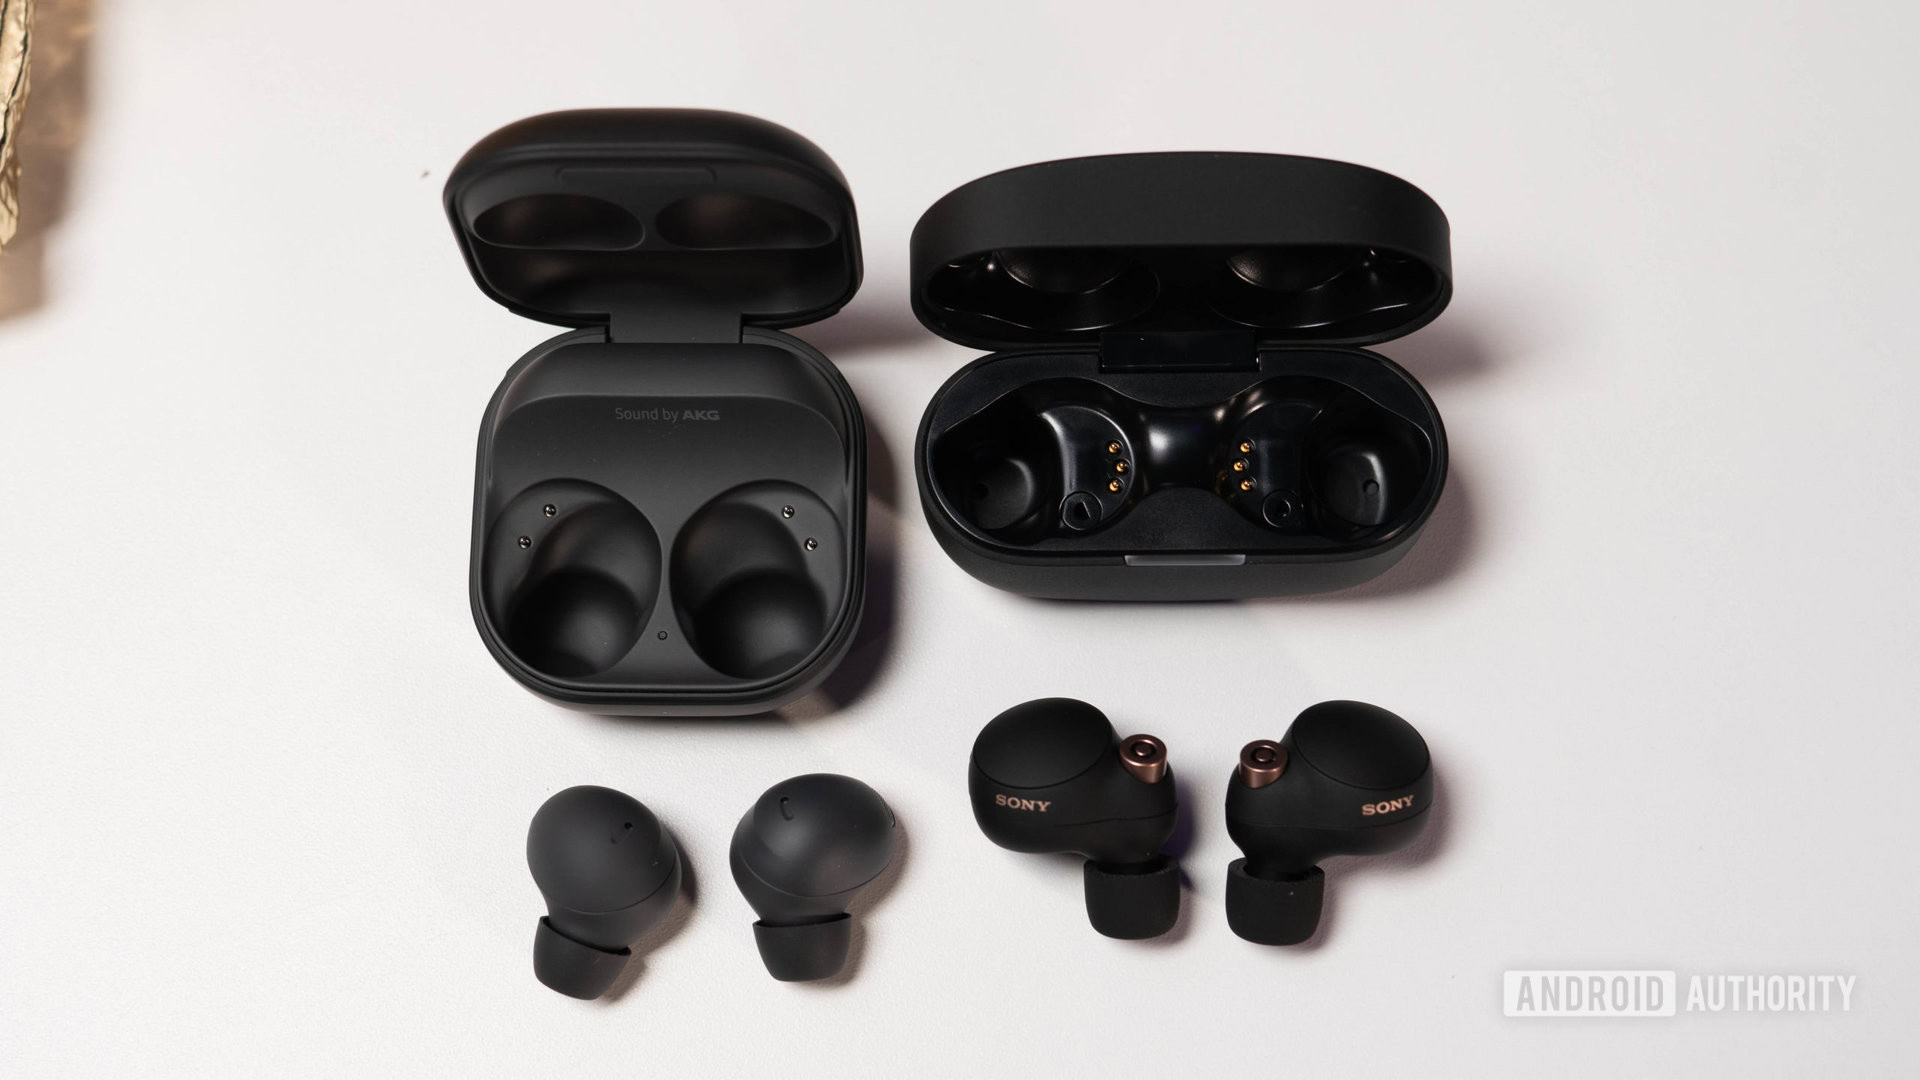 Galaxy Buds 2 Pro review: Big sound in a tiny package